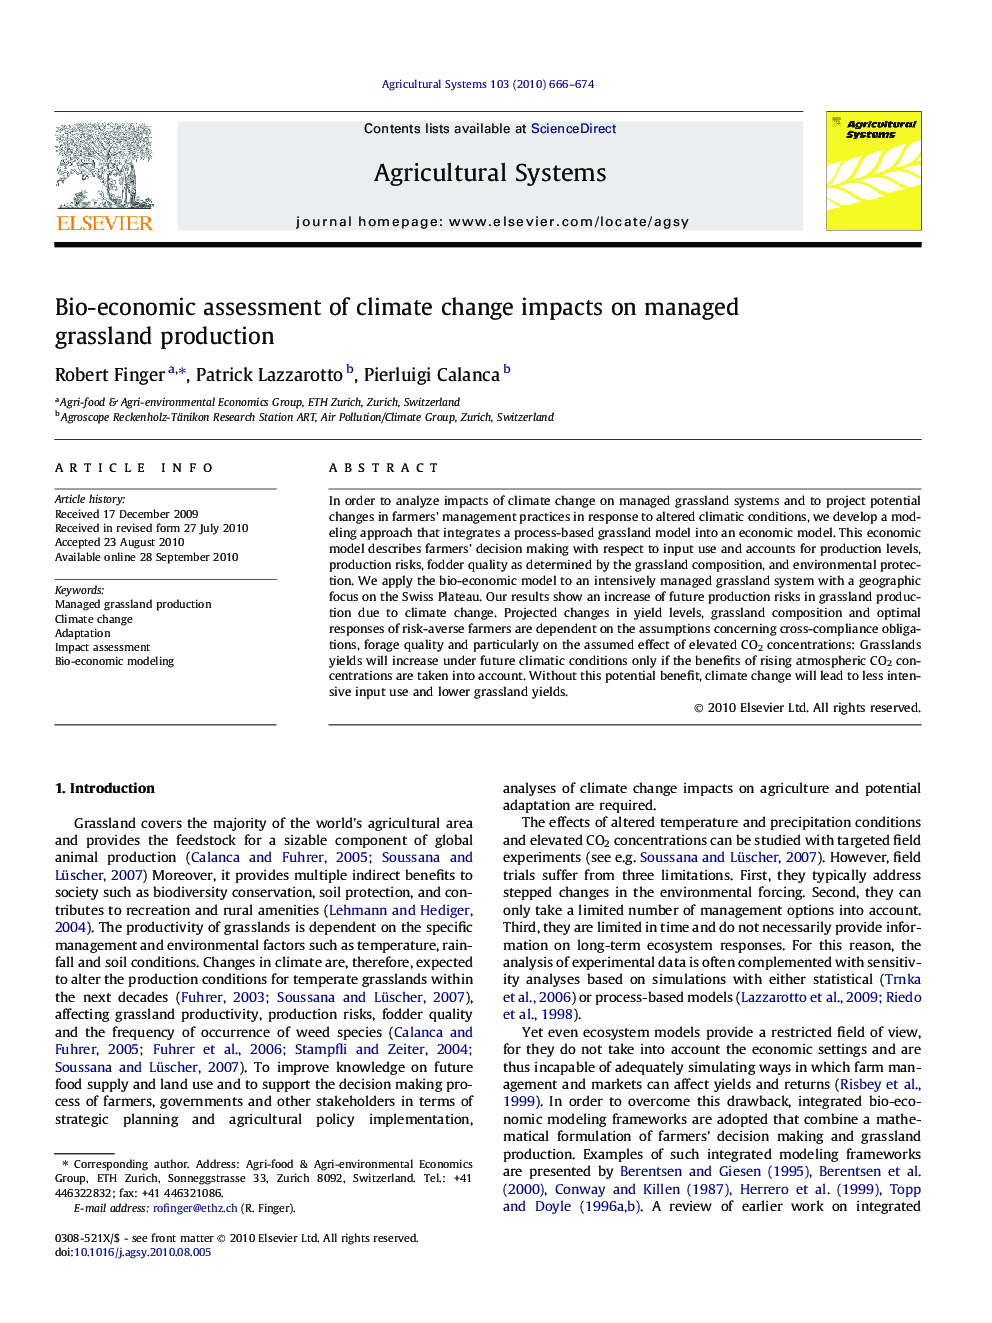 Bio-economic assessment of climate change impacts on managed grassland production